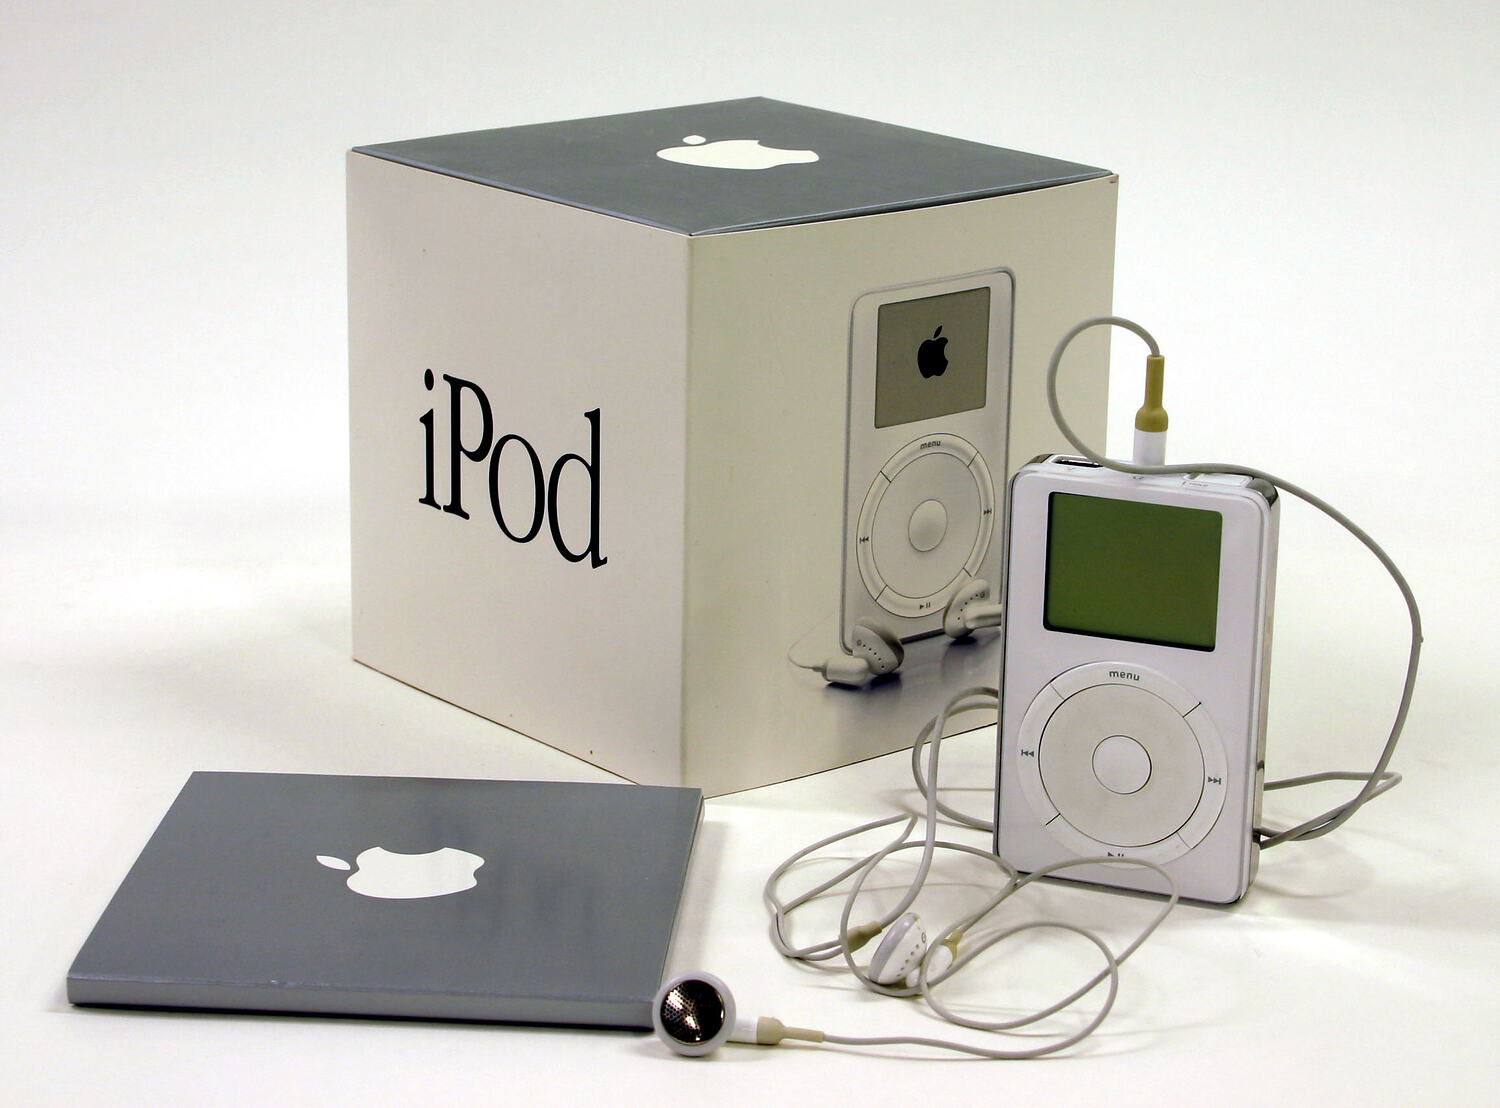 download the last version for ipod iReal Pro